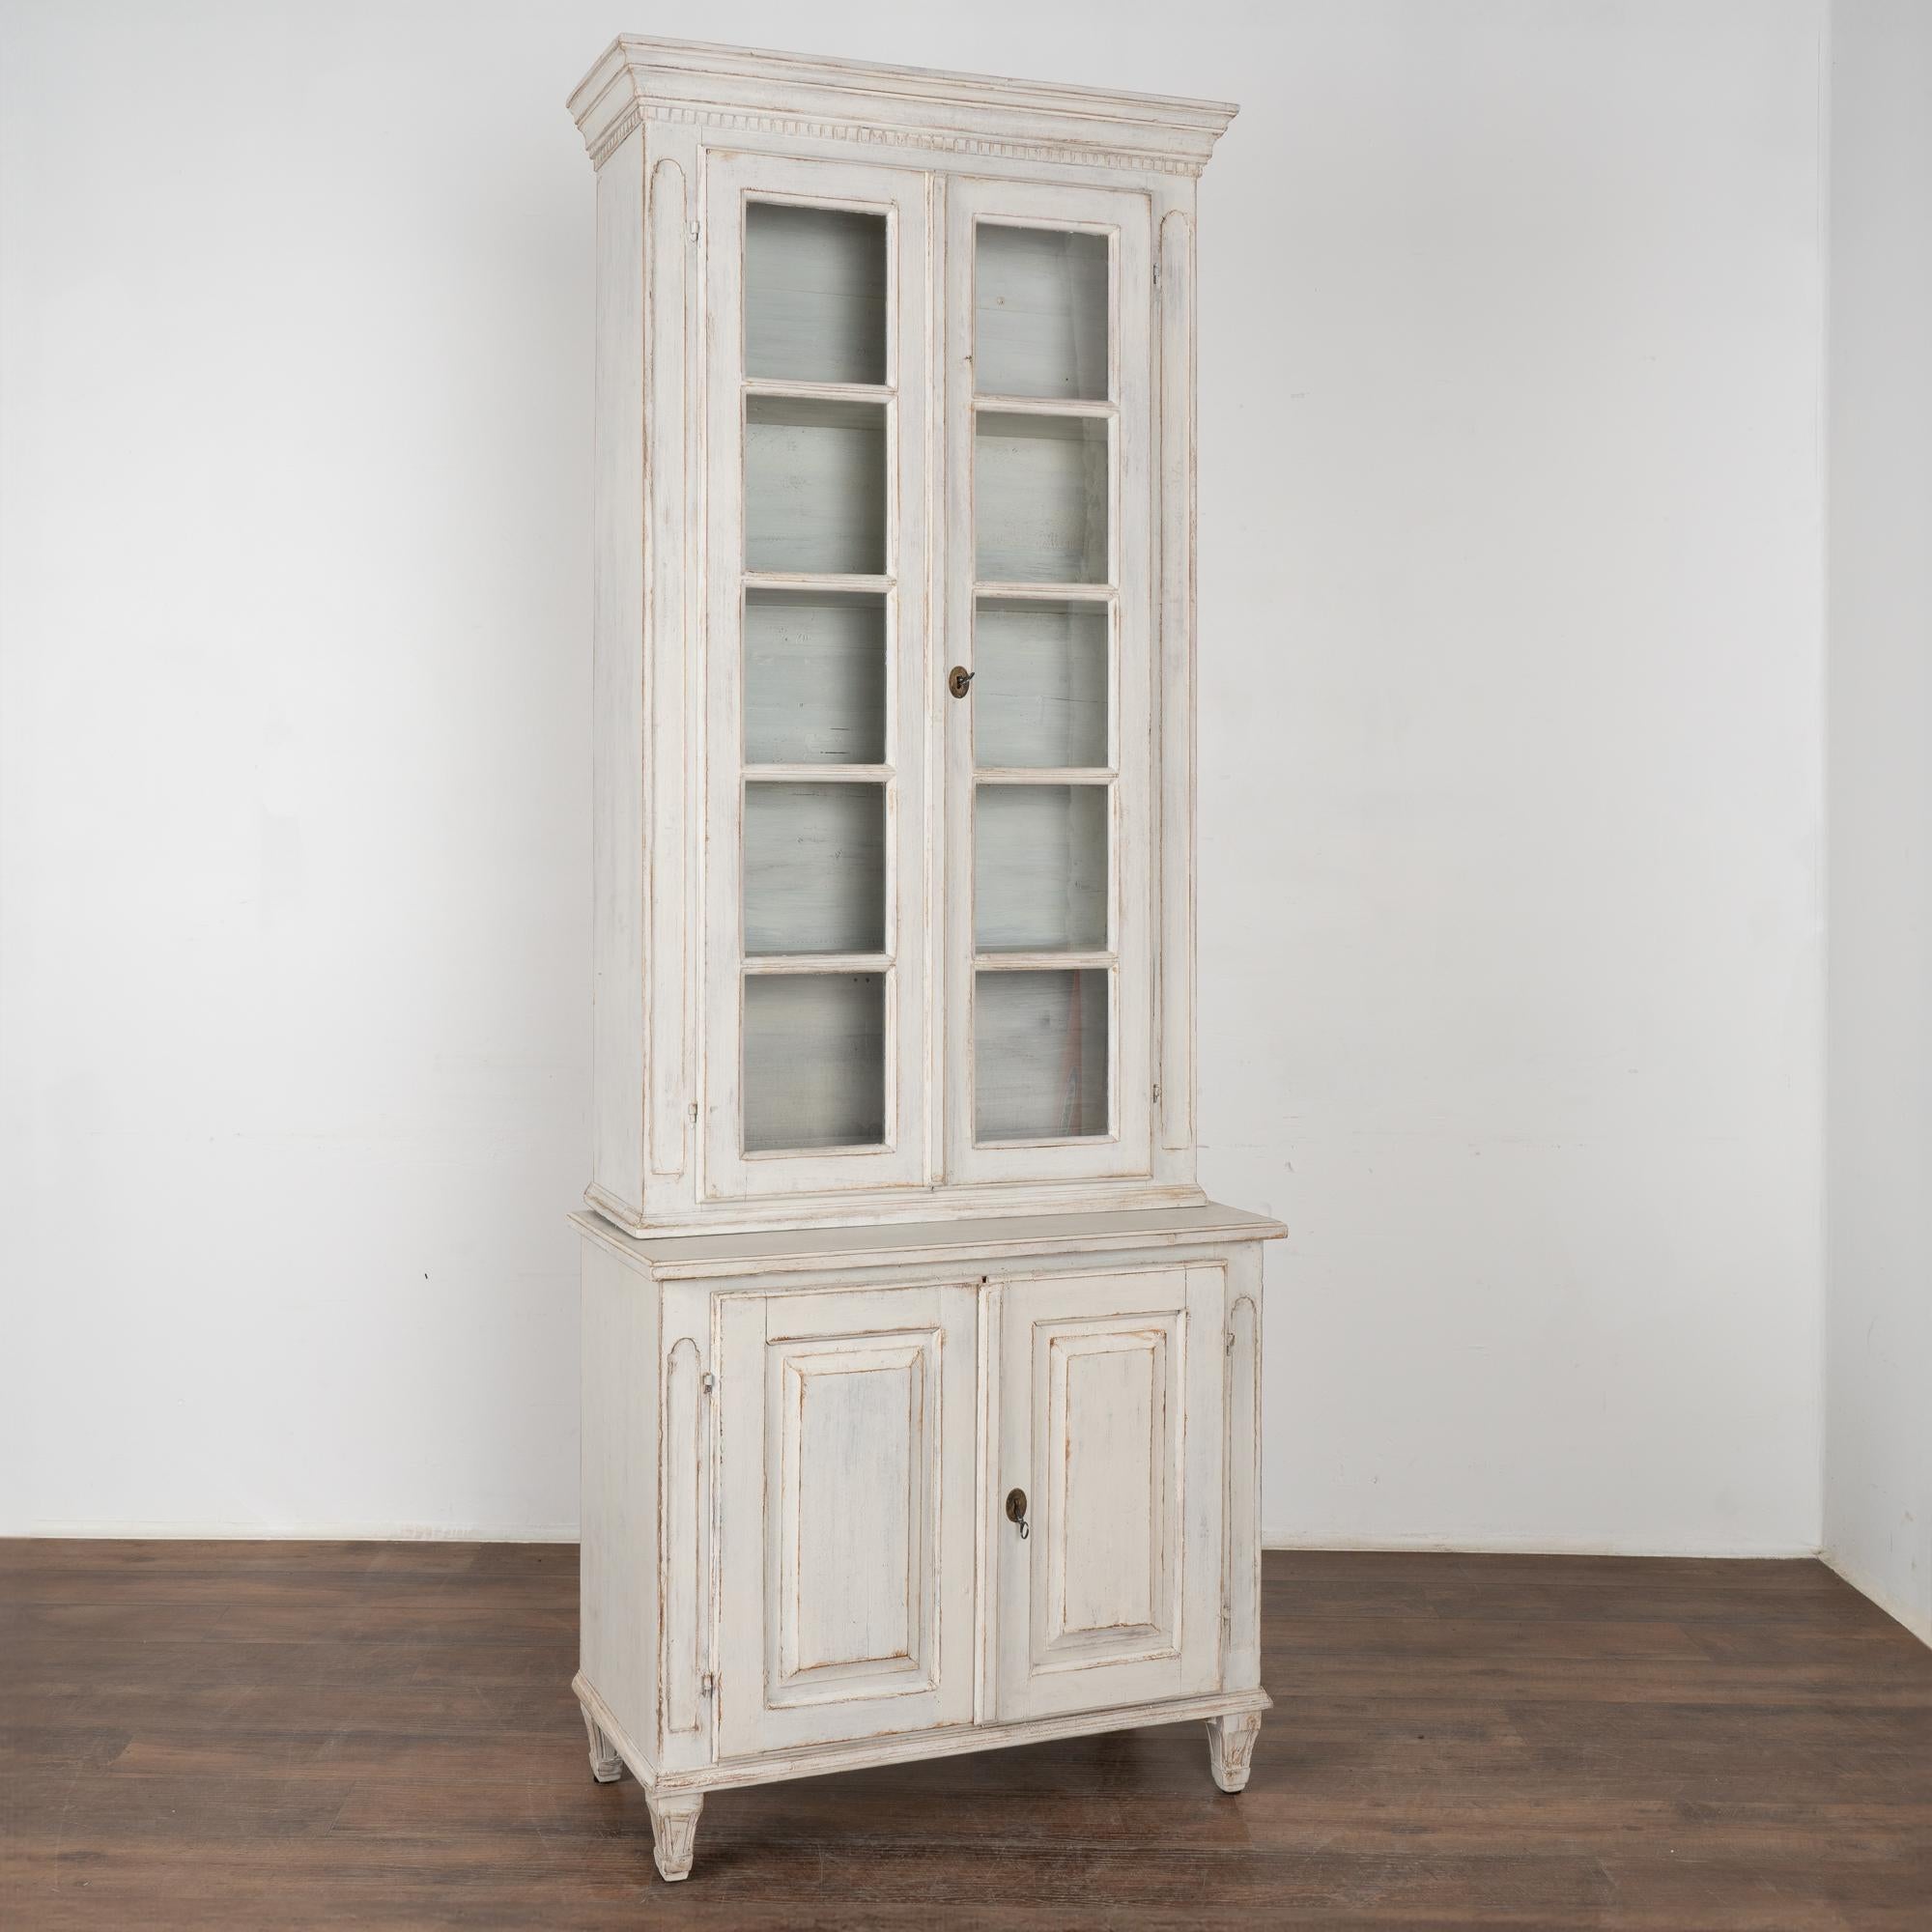 Delightful tall and narrow white painted pine bookcase built in two sections for easier installation. Stands just under 8' tall.
Dentil molding along crown and simple carved details along vertical sides of doors.
Restored, later professionally